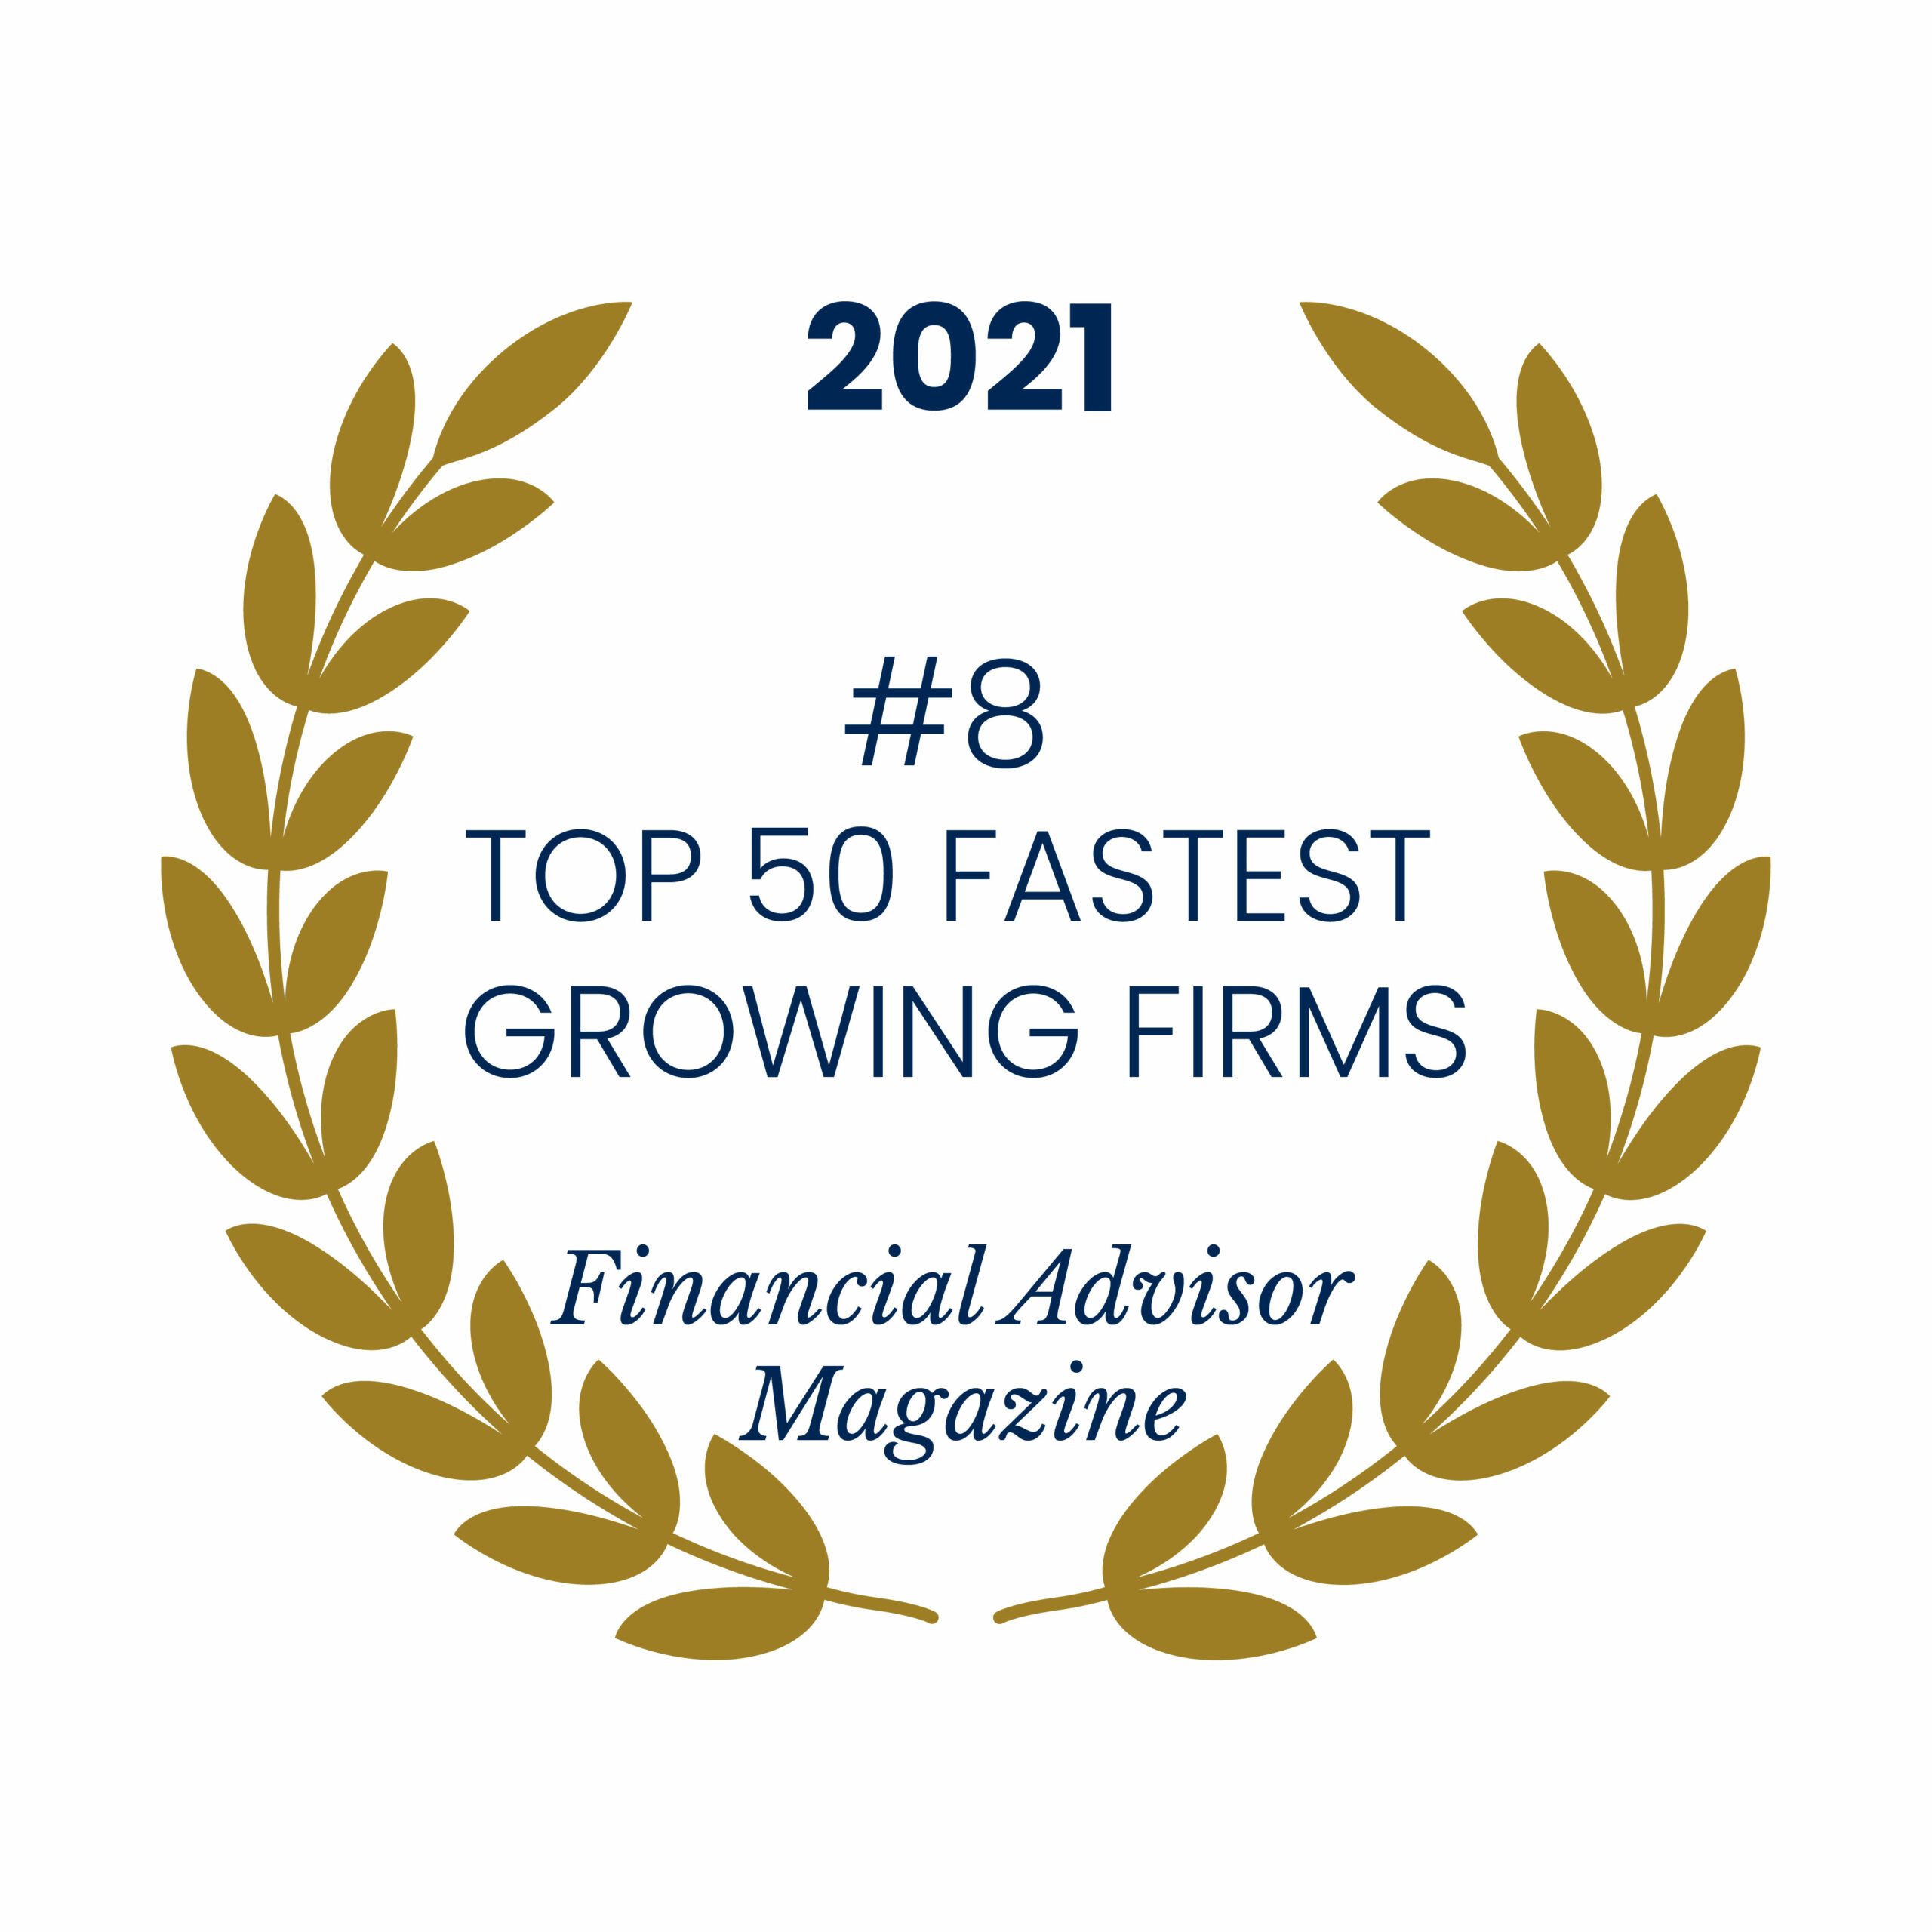 2021 #8 Top 50 Fastest Growing Firms